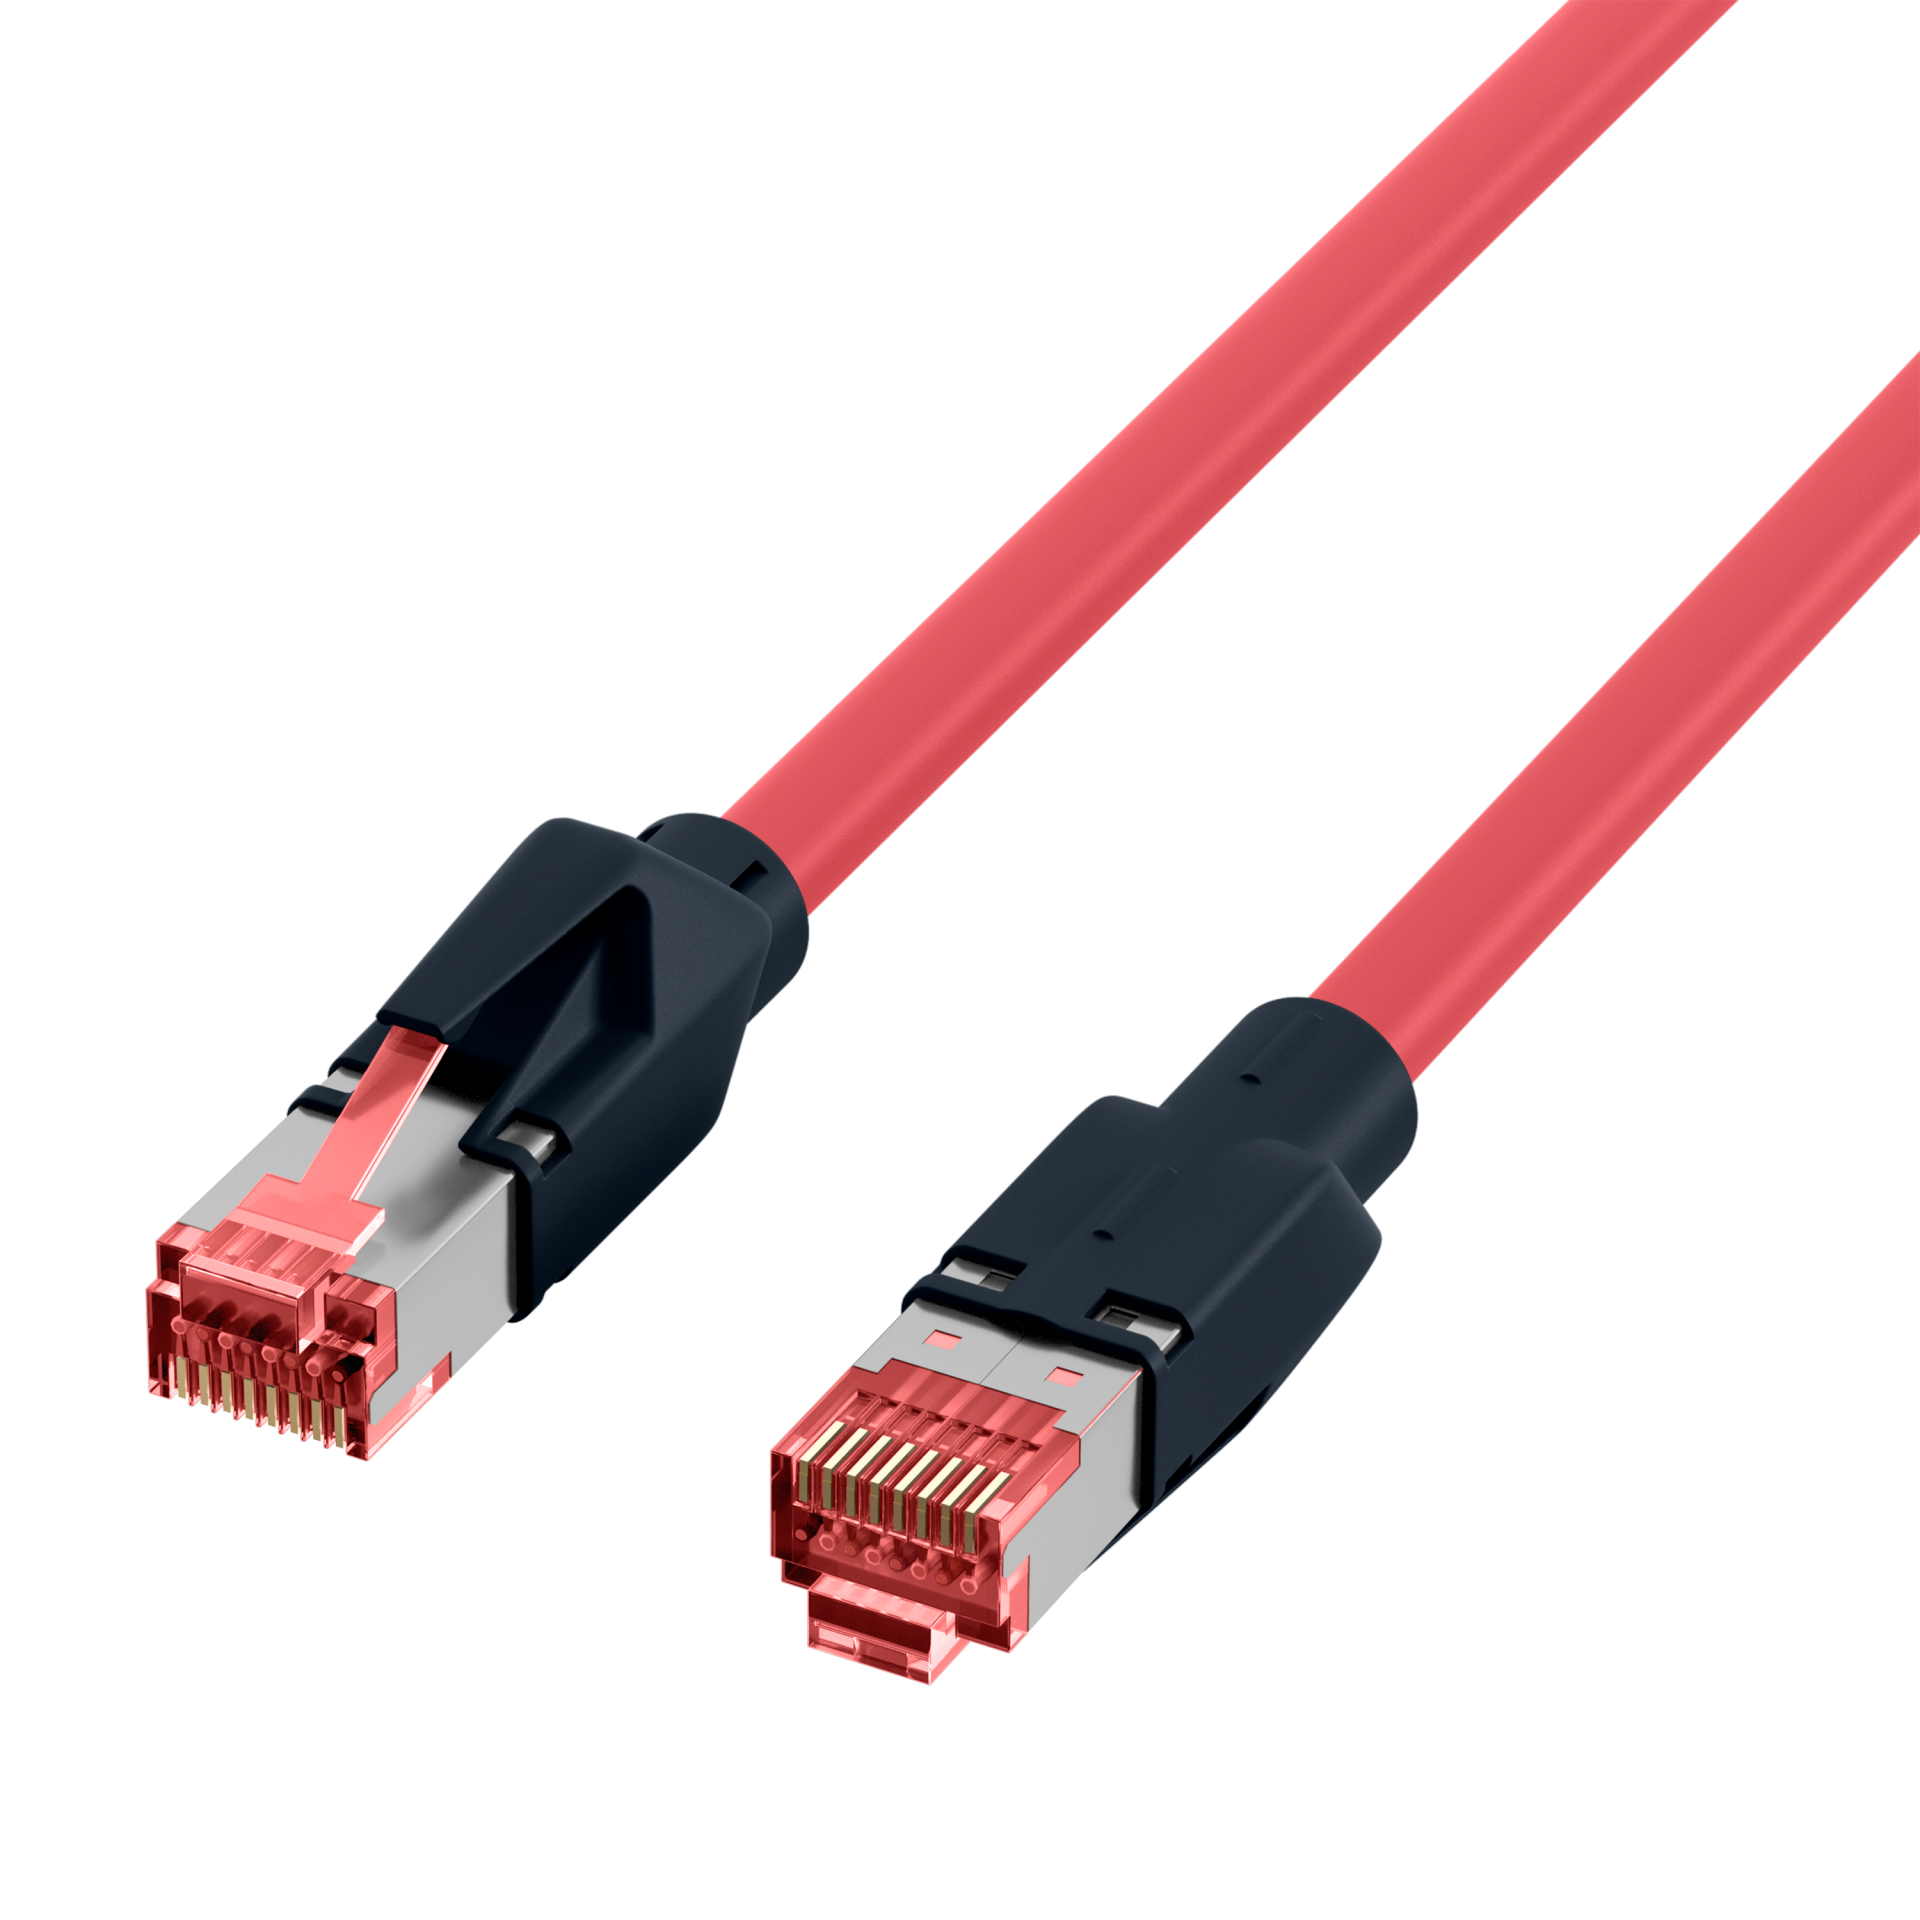 RJ45 Patch Cord Cat.6A S/FTP PUR Draka UC900 TM21 red 5m